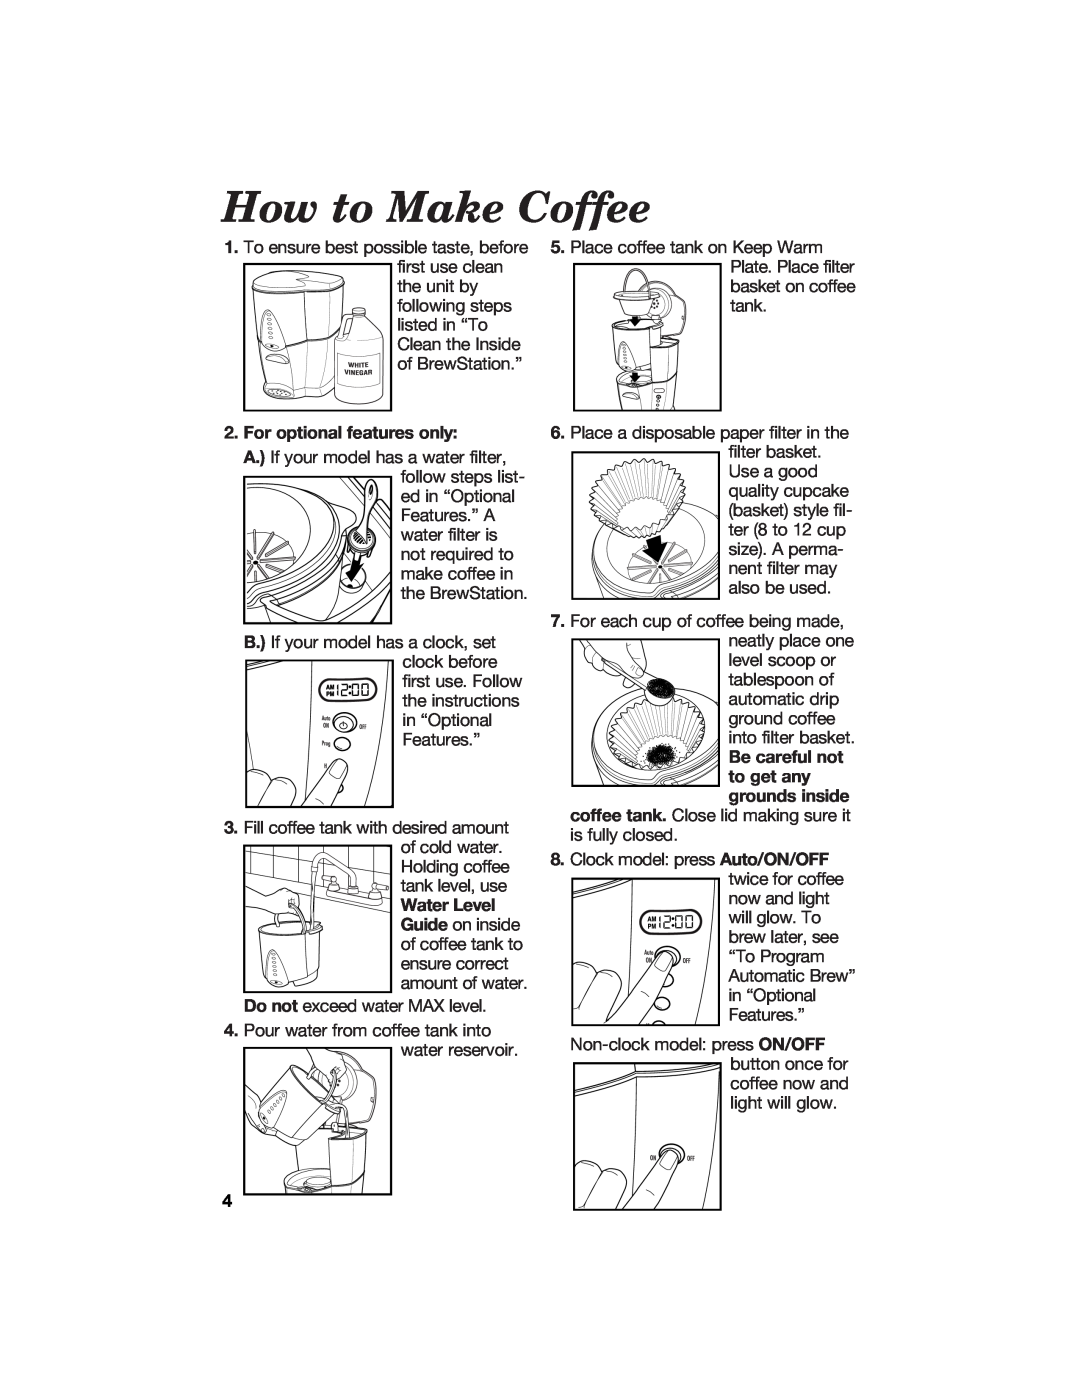 Hamilton Beach BrewStation manual How to Make Coffee, For optional features only, Water Level 